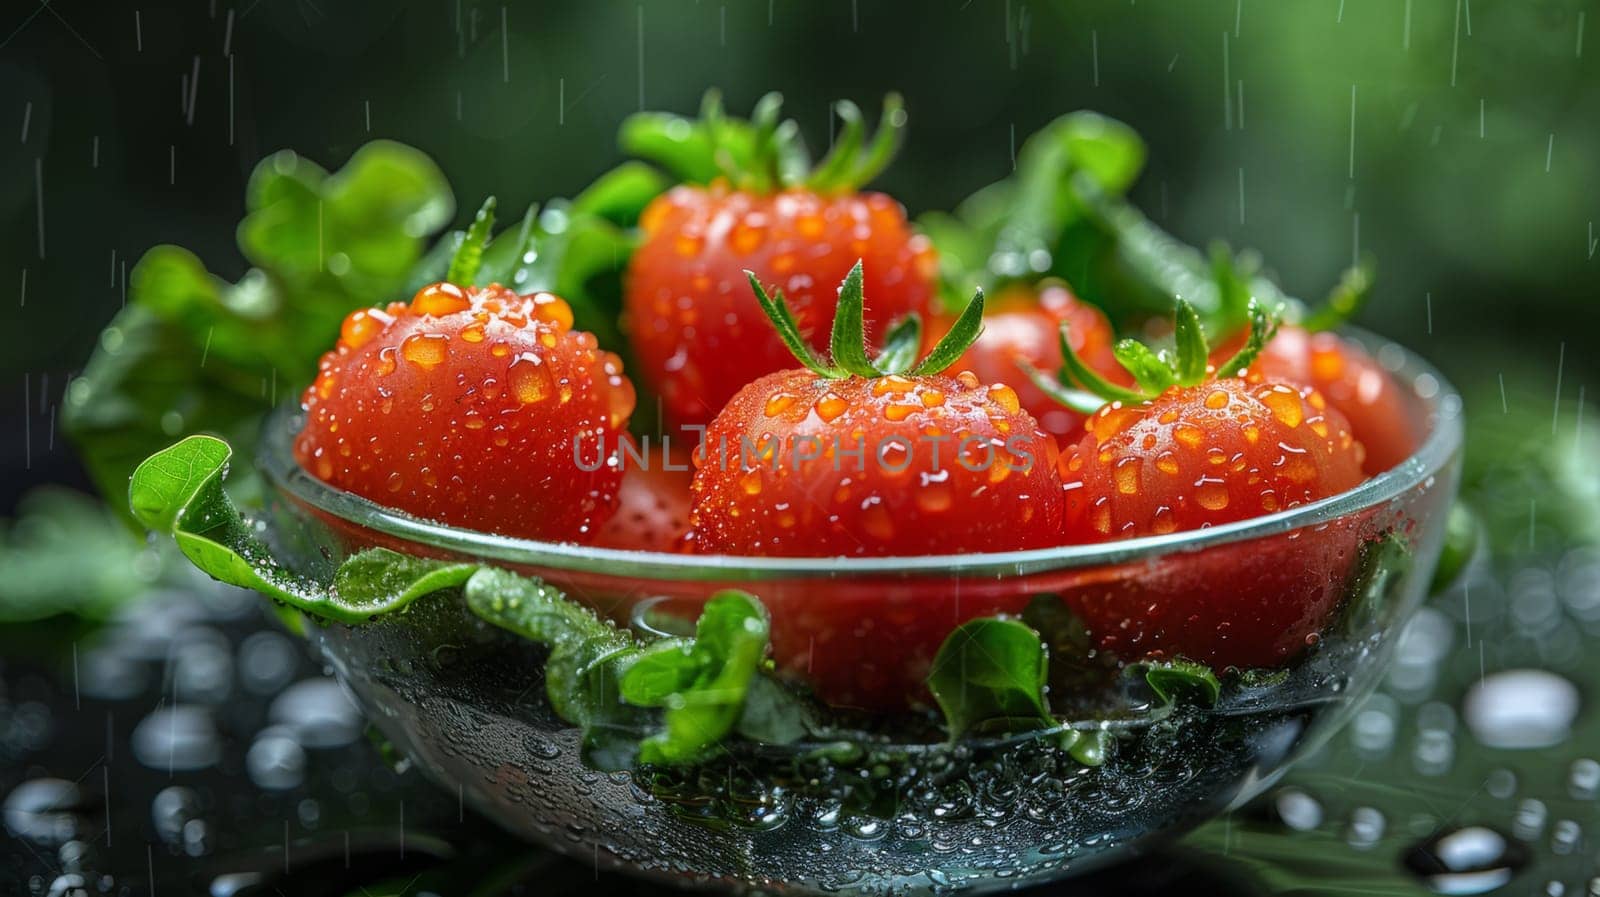 A bowl of strawberries with water droplets on them in a glass